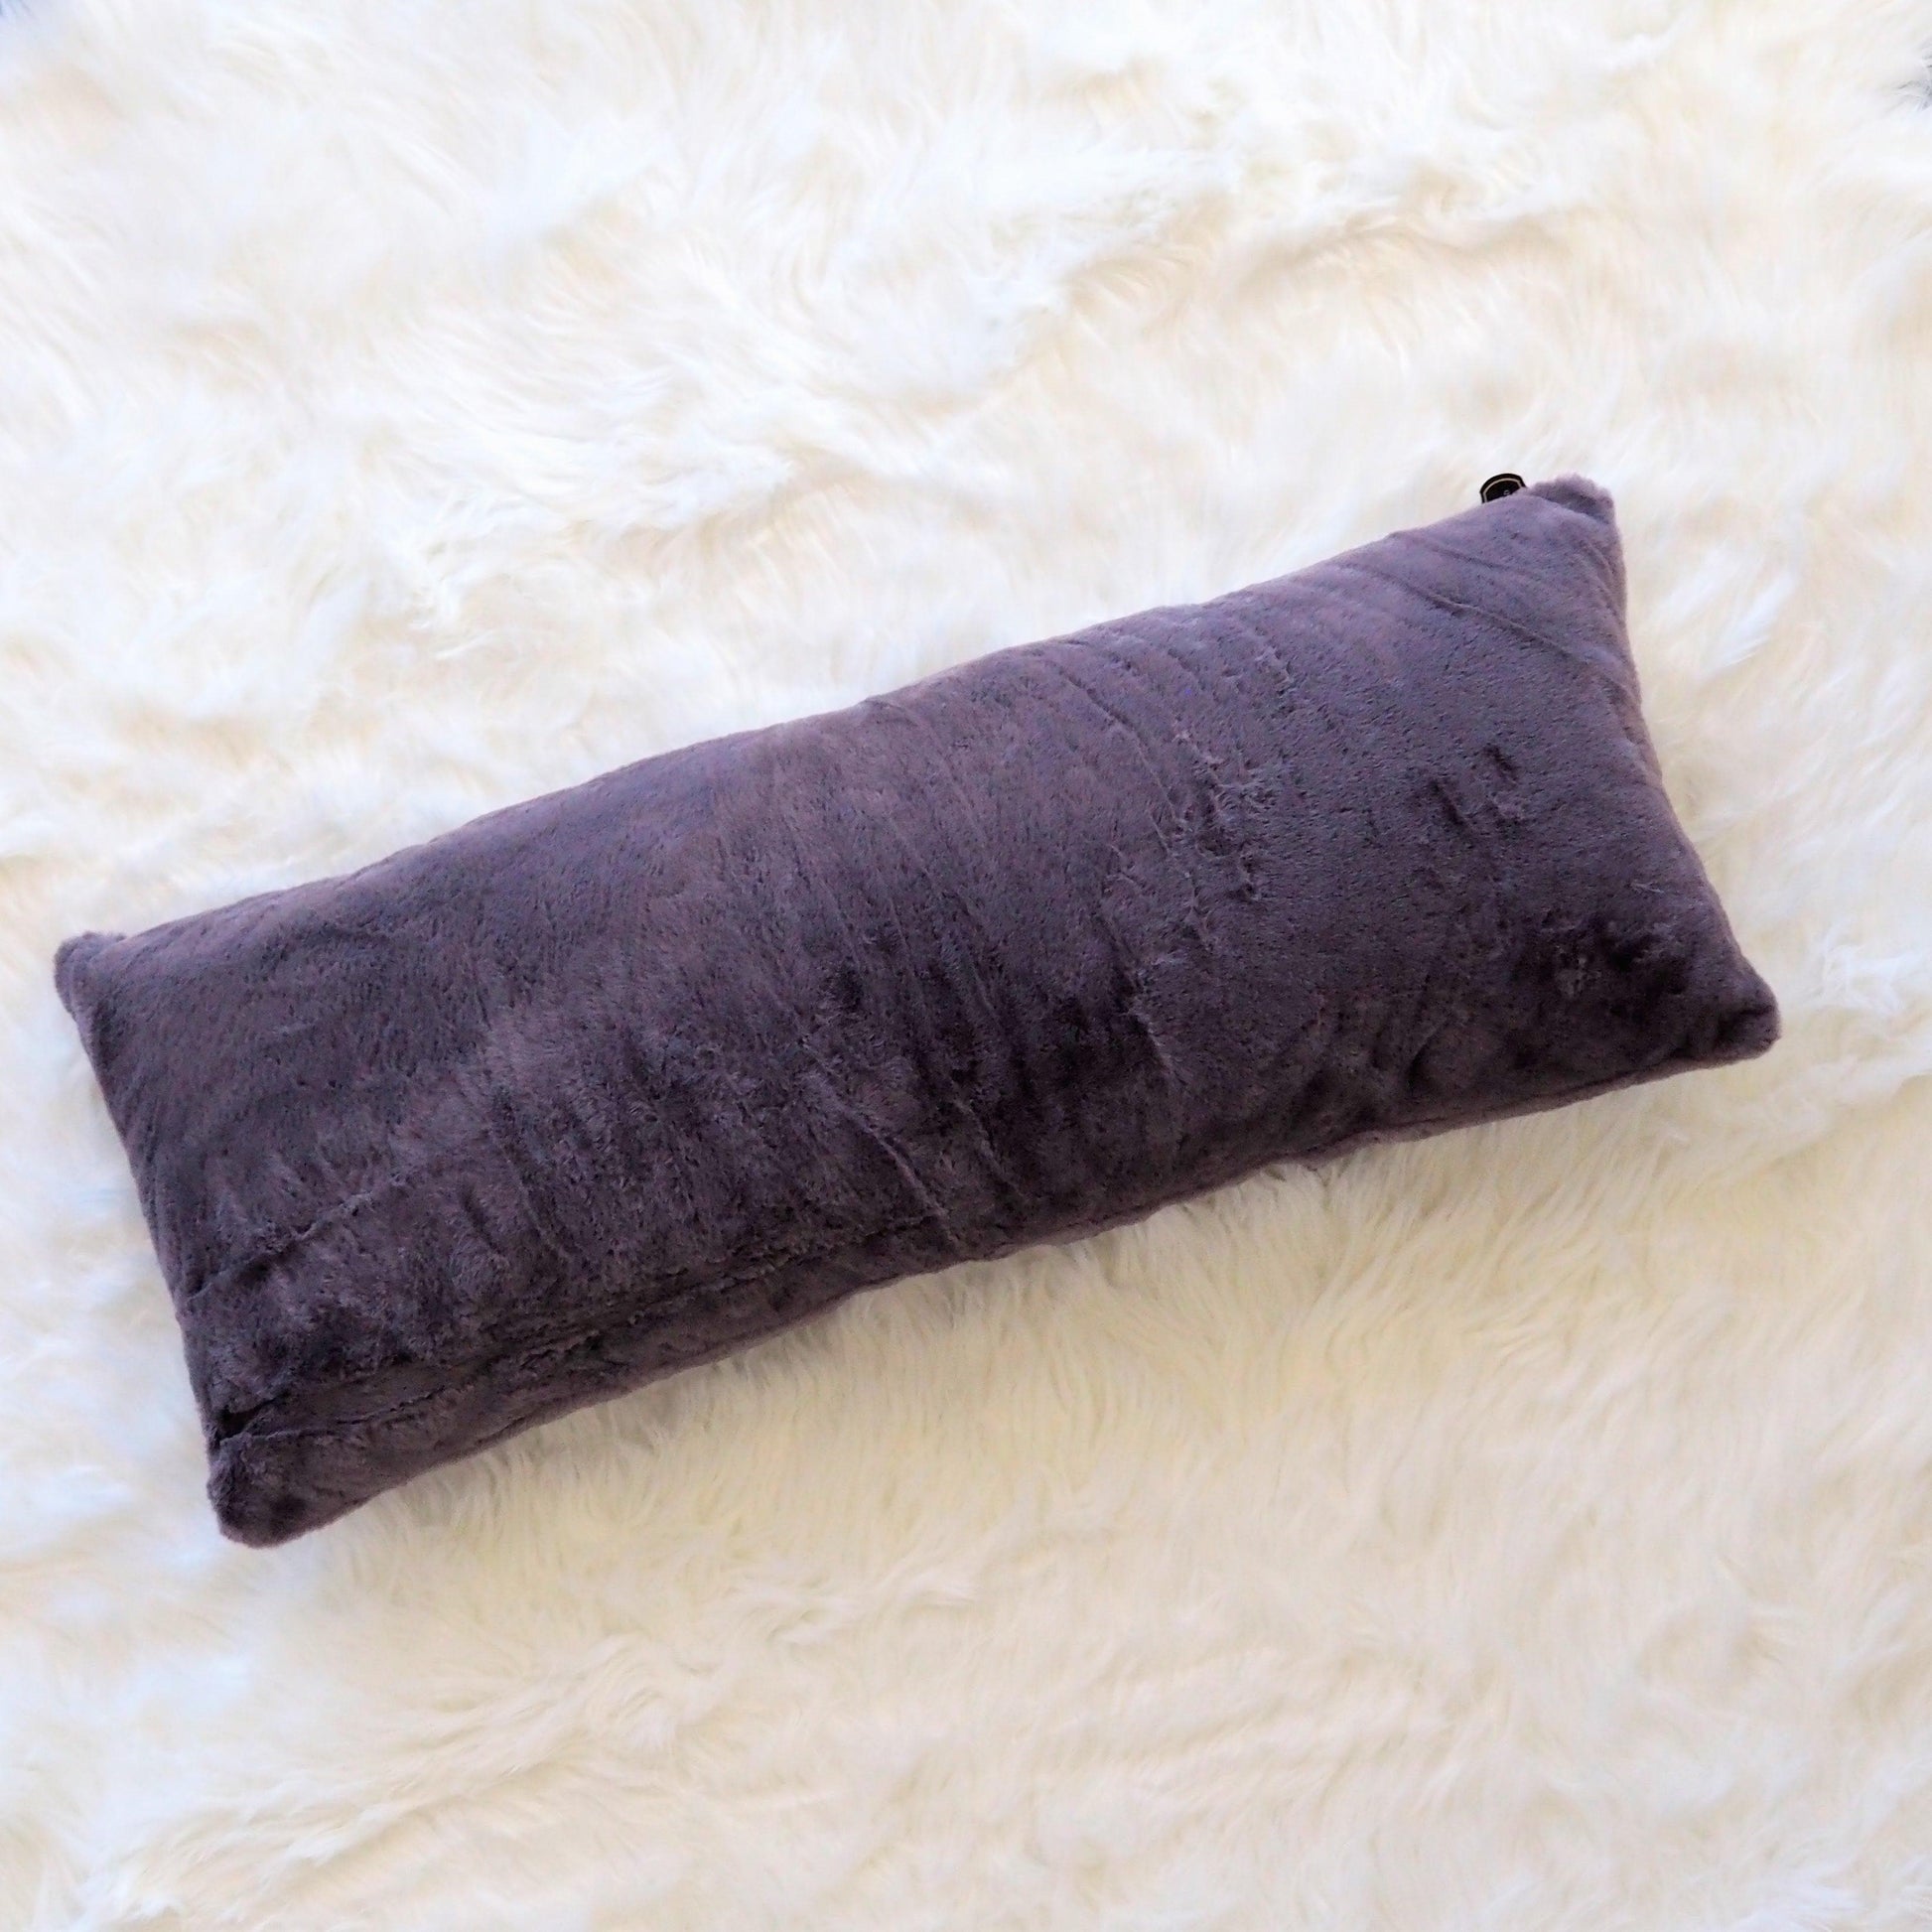 Faux Fur Lumbar Pillow with Adjustable Insert - MAIA HOMES